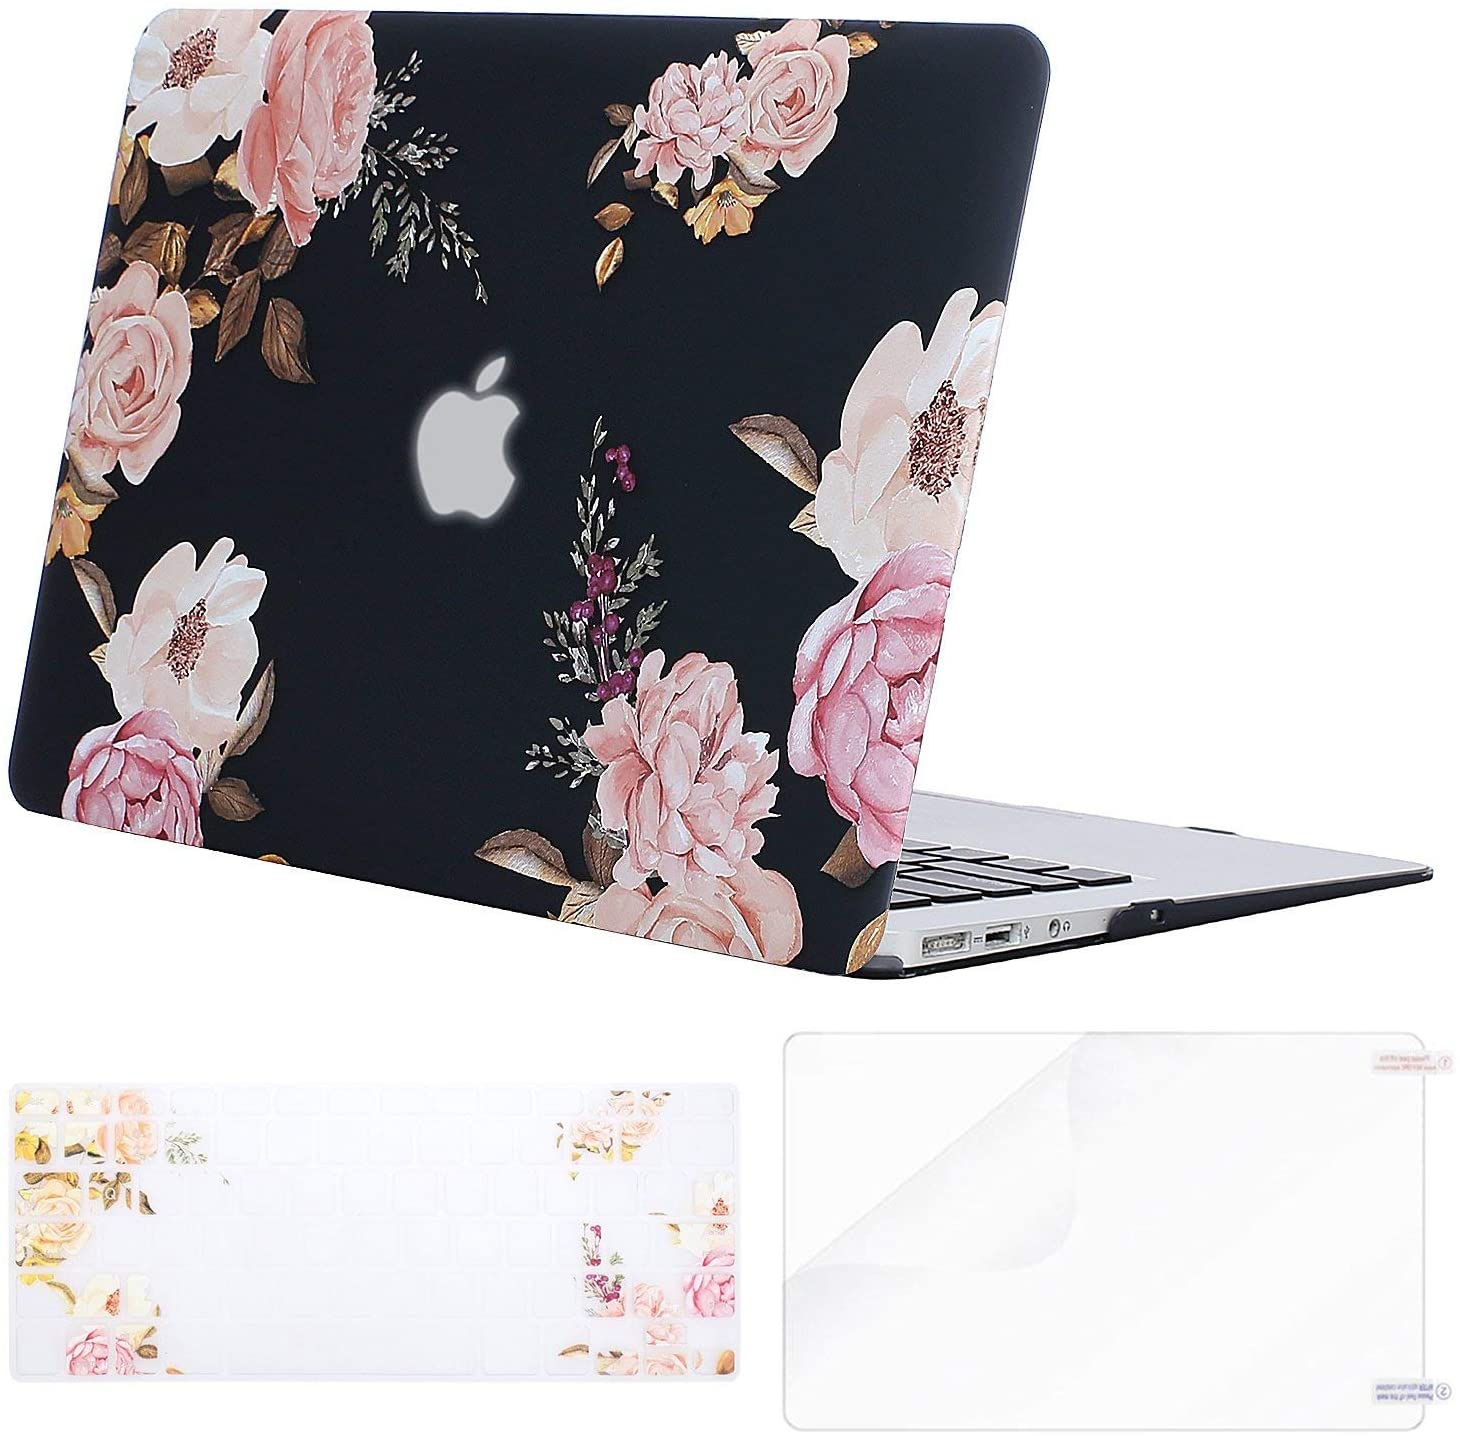 Black Floral -  MacBook Air 13 inch Case 2009 - 2017 Release. Hard case, keyborad & screen protector. - e4cents